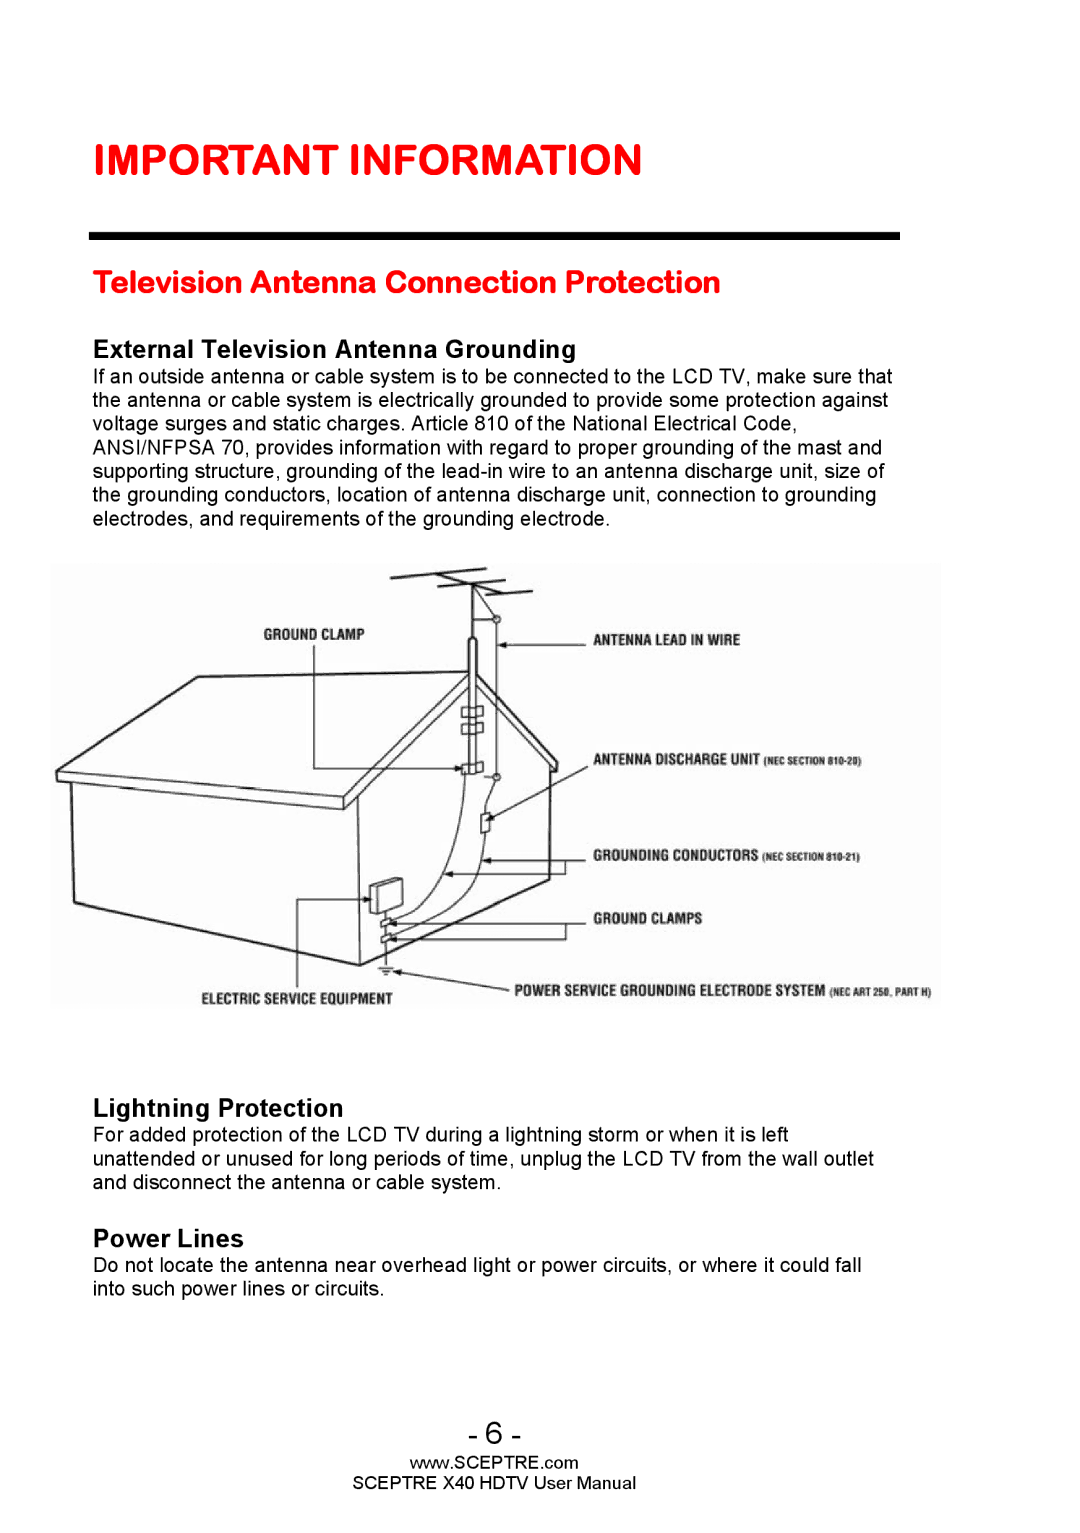 Sceptre Technologies X40 user manual Television Antenna Connection Protection, External Television Antenna Grounding 